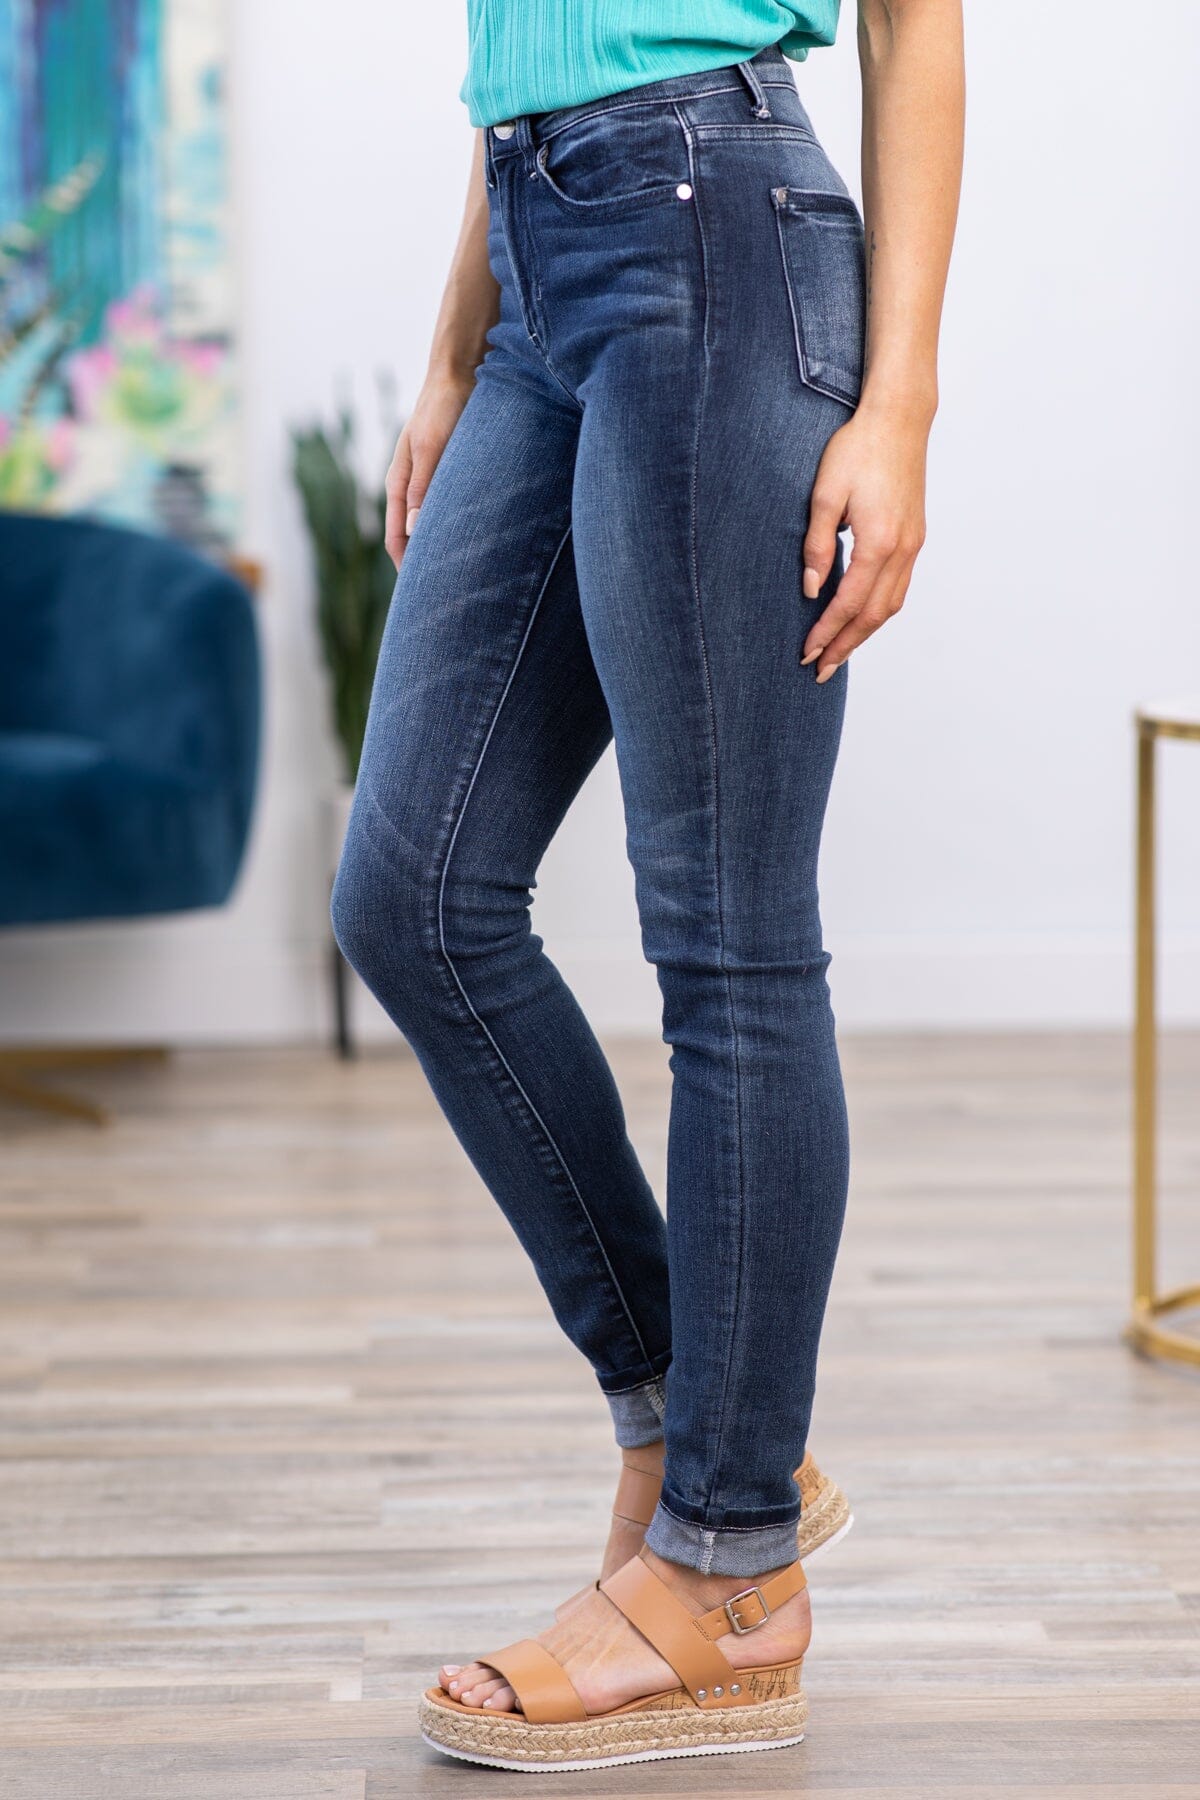 Judy Blue Dark Wash Jeans With Whiskering - Filly Flair